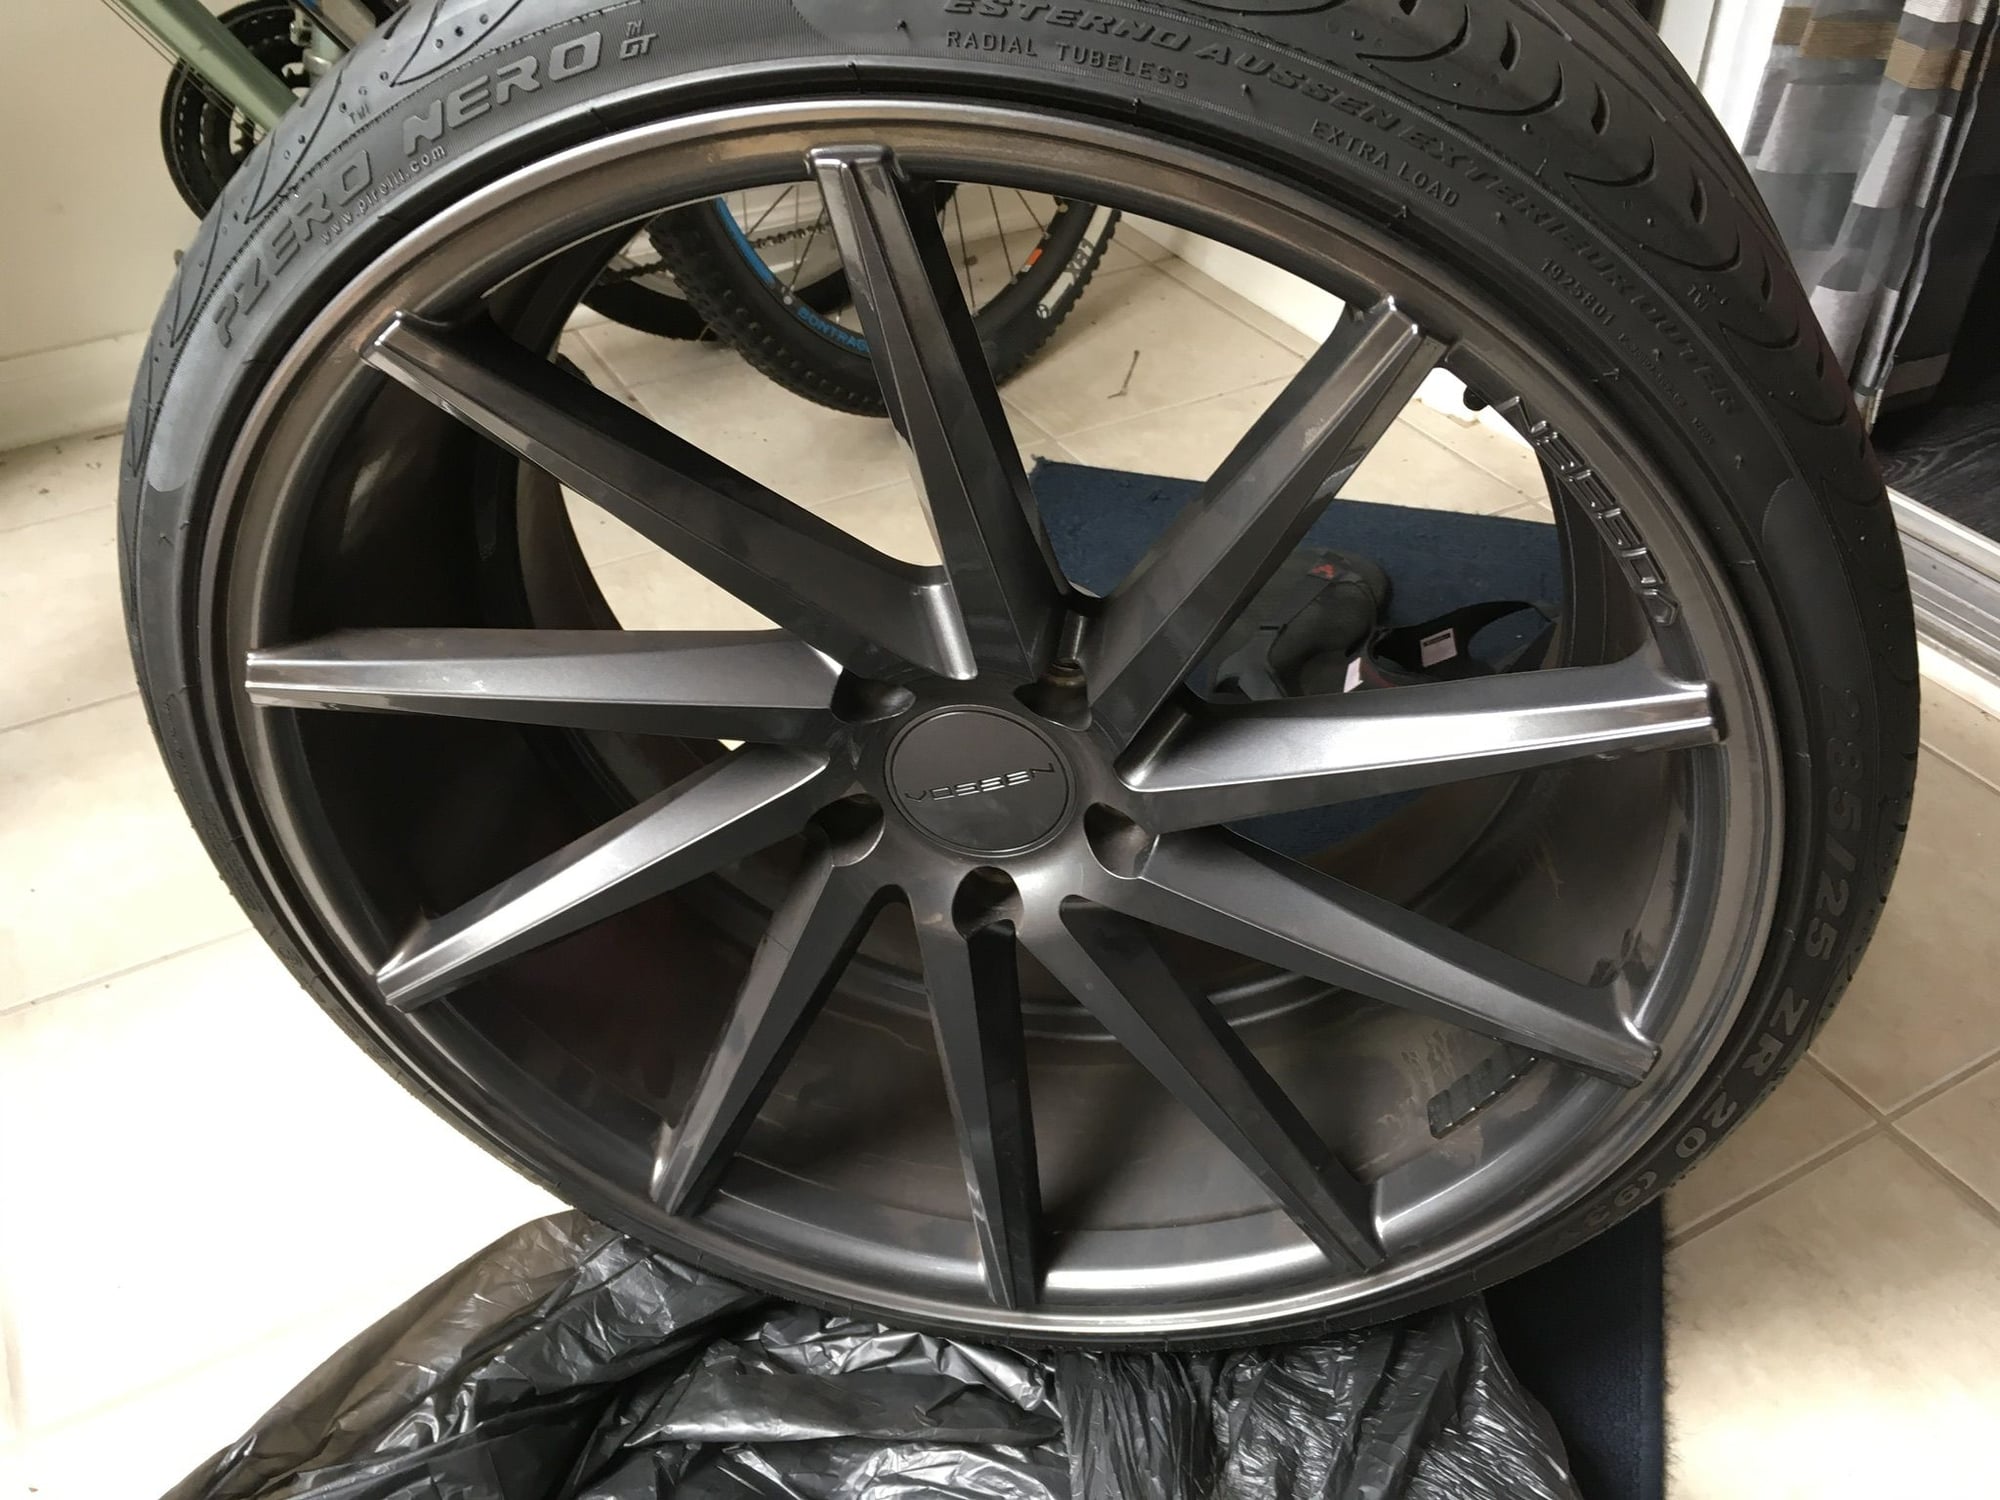 Wheels and Tires/Axles - Vossen 20 inch directional wheels - Used - Indianapols, IN 46228, United States